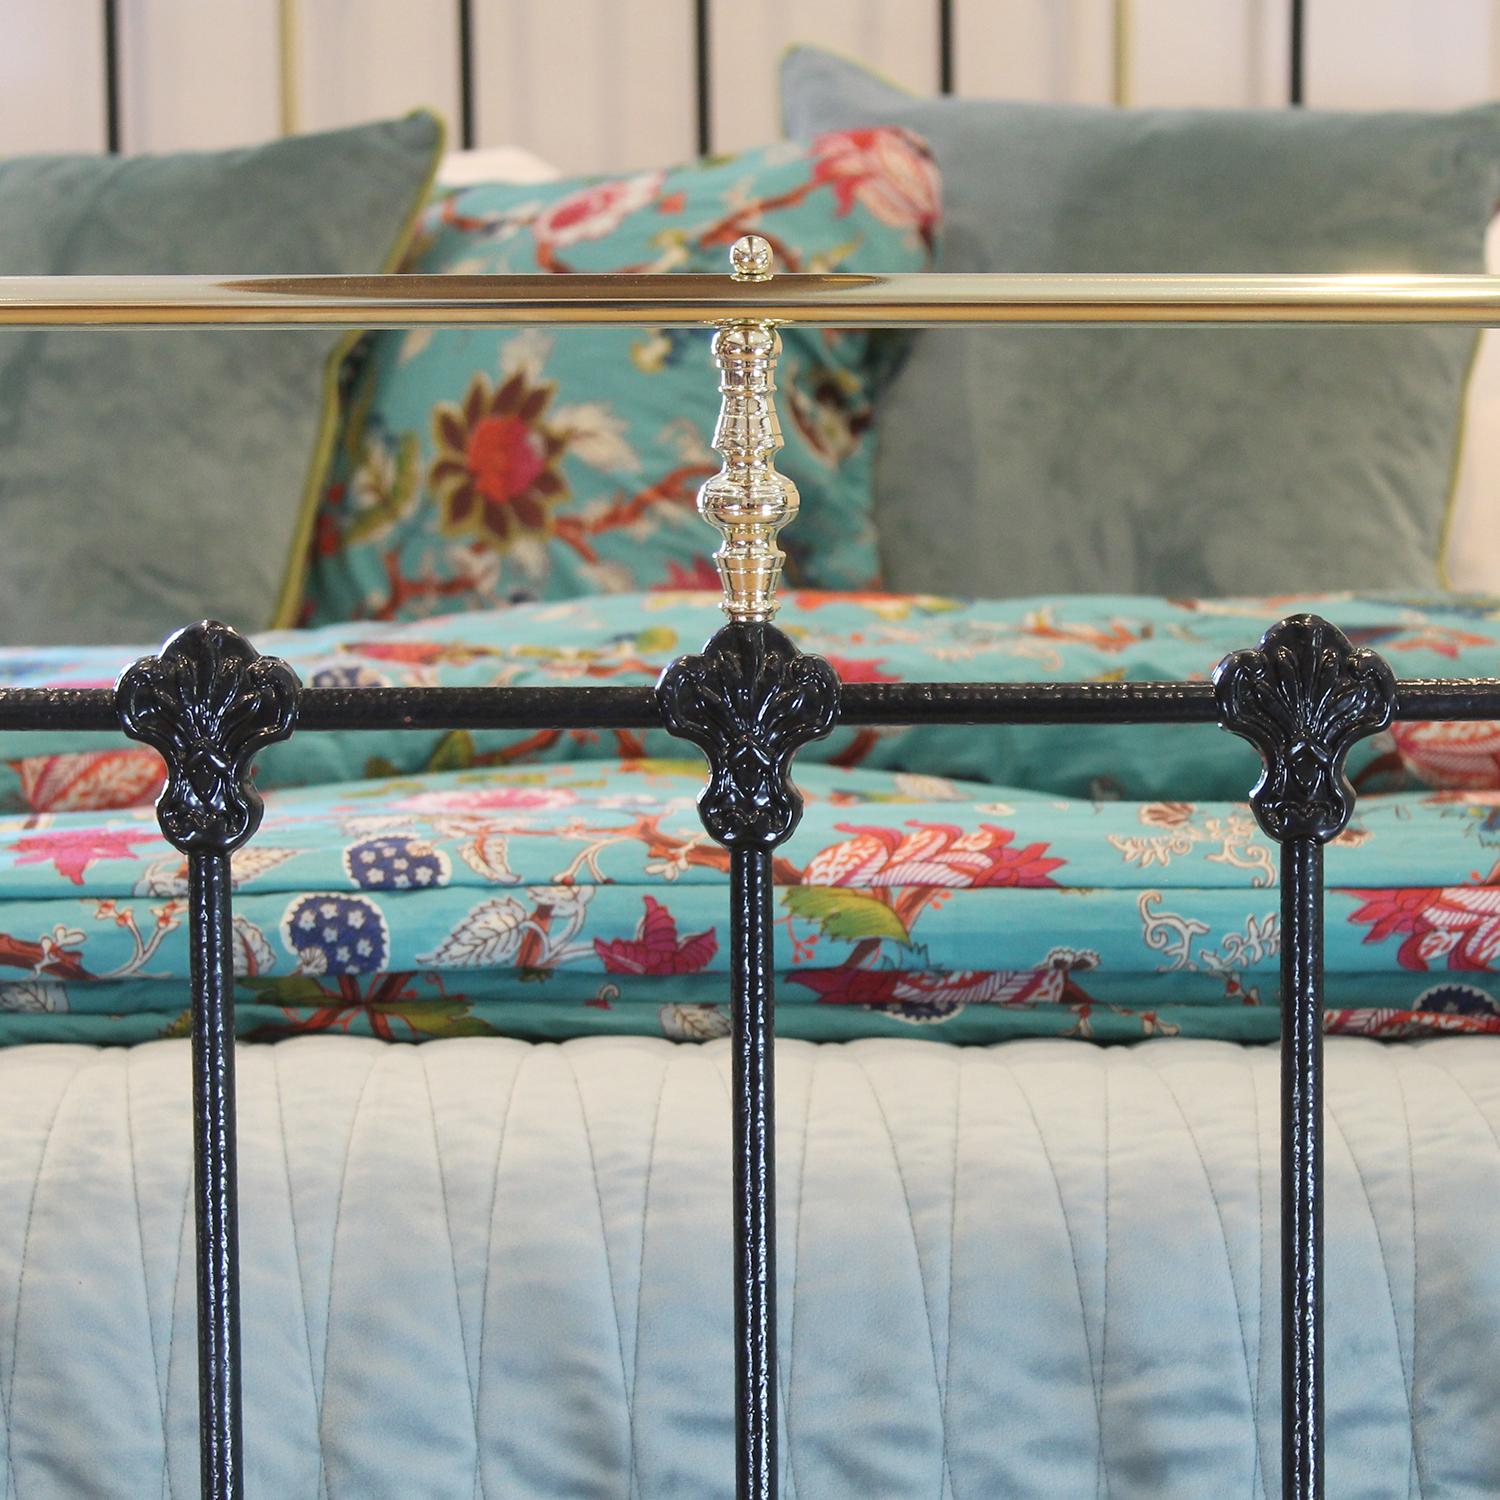 Cast Antique Brass and Iron Bed in Black, MK255